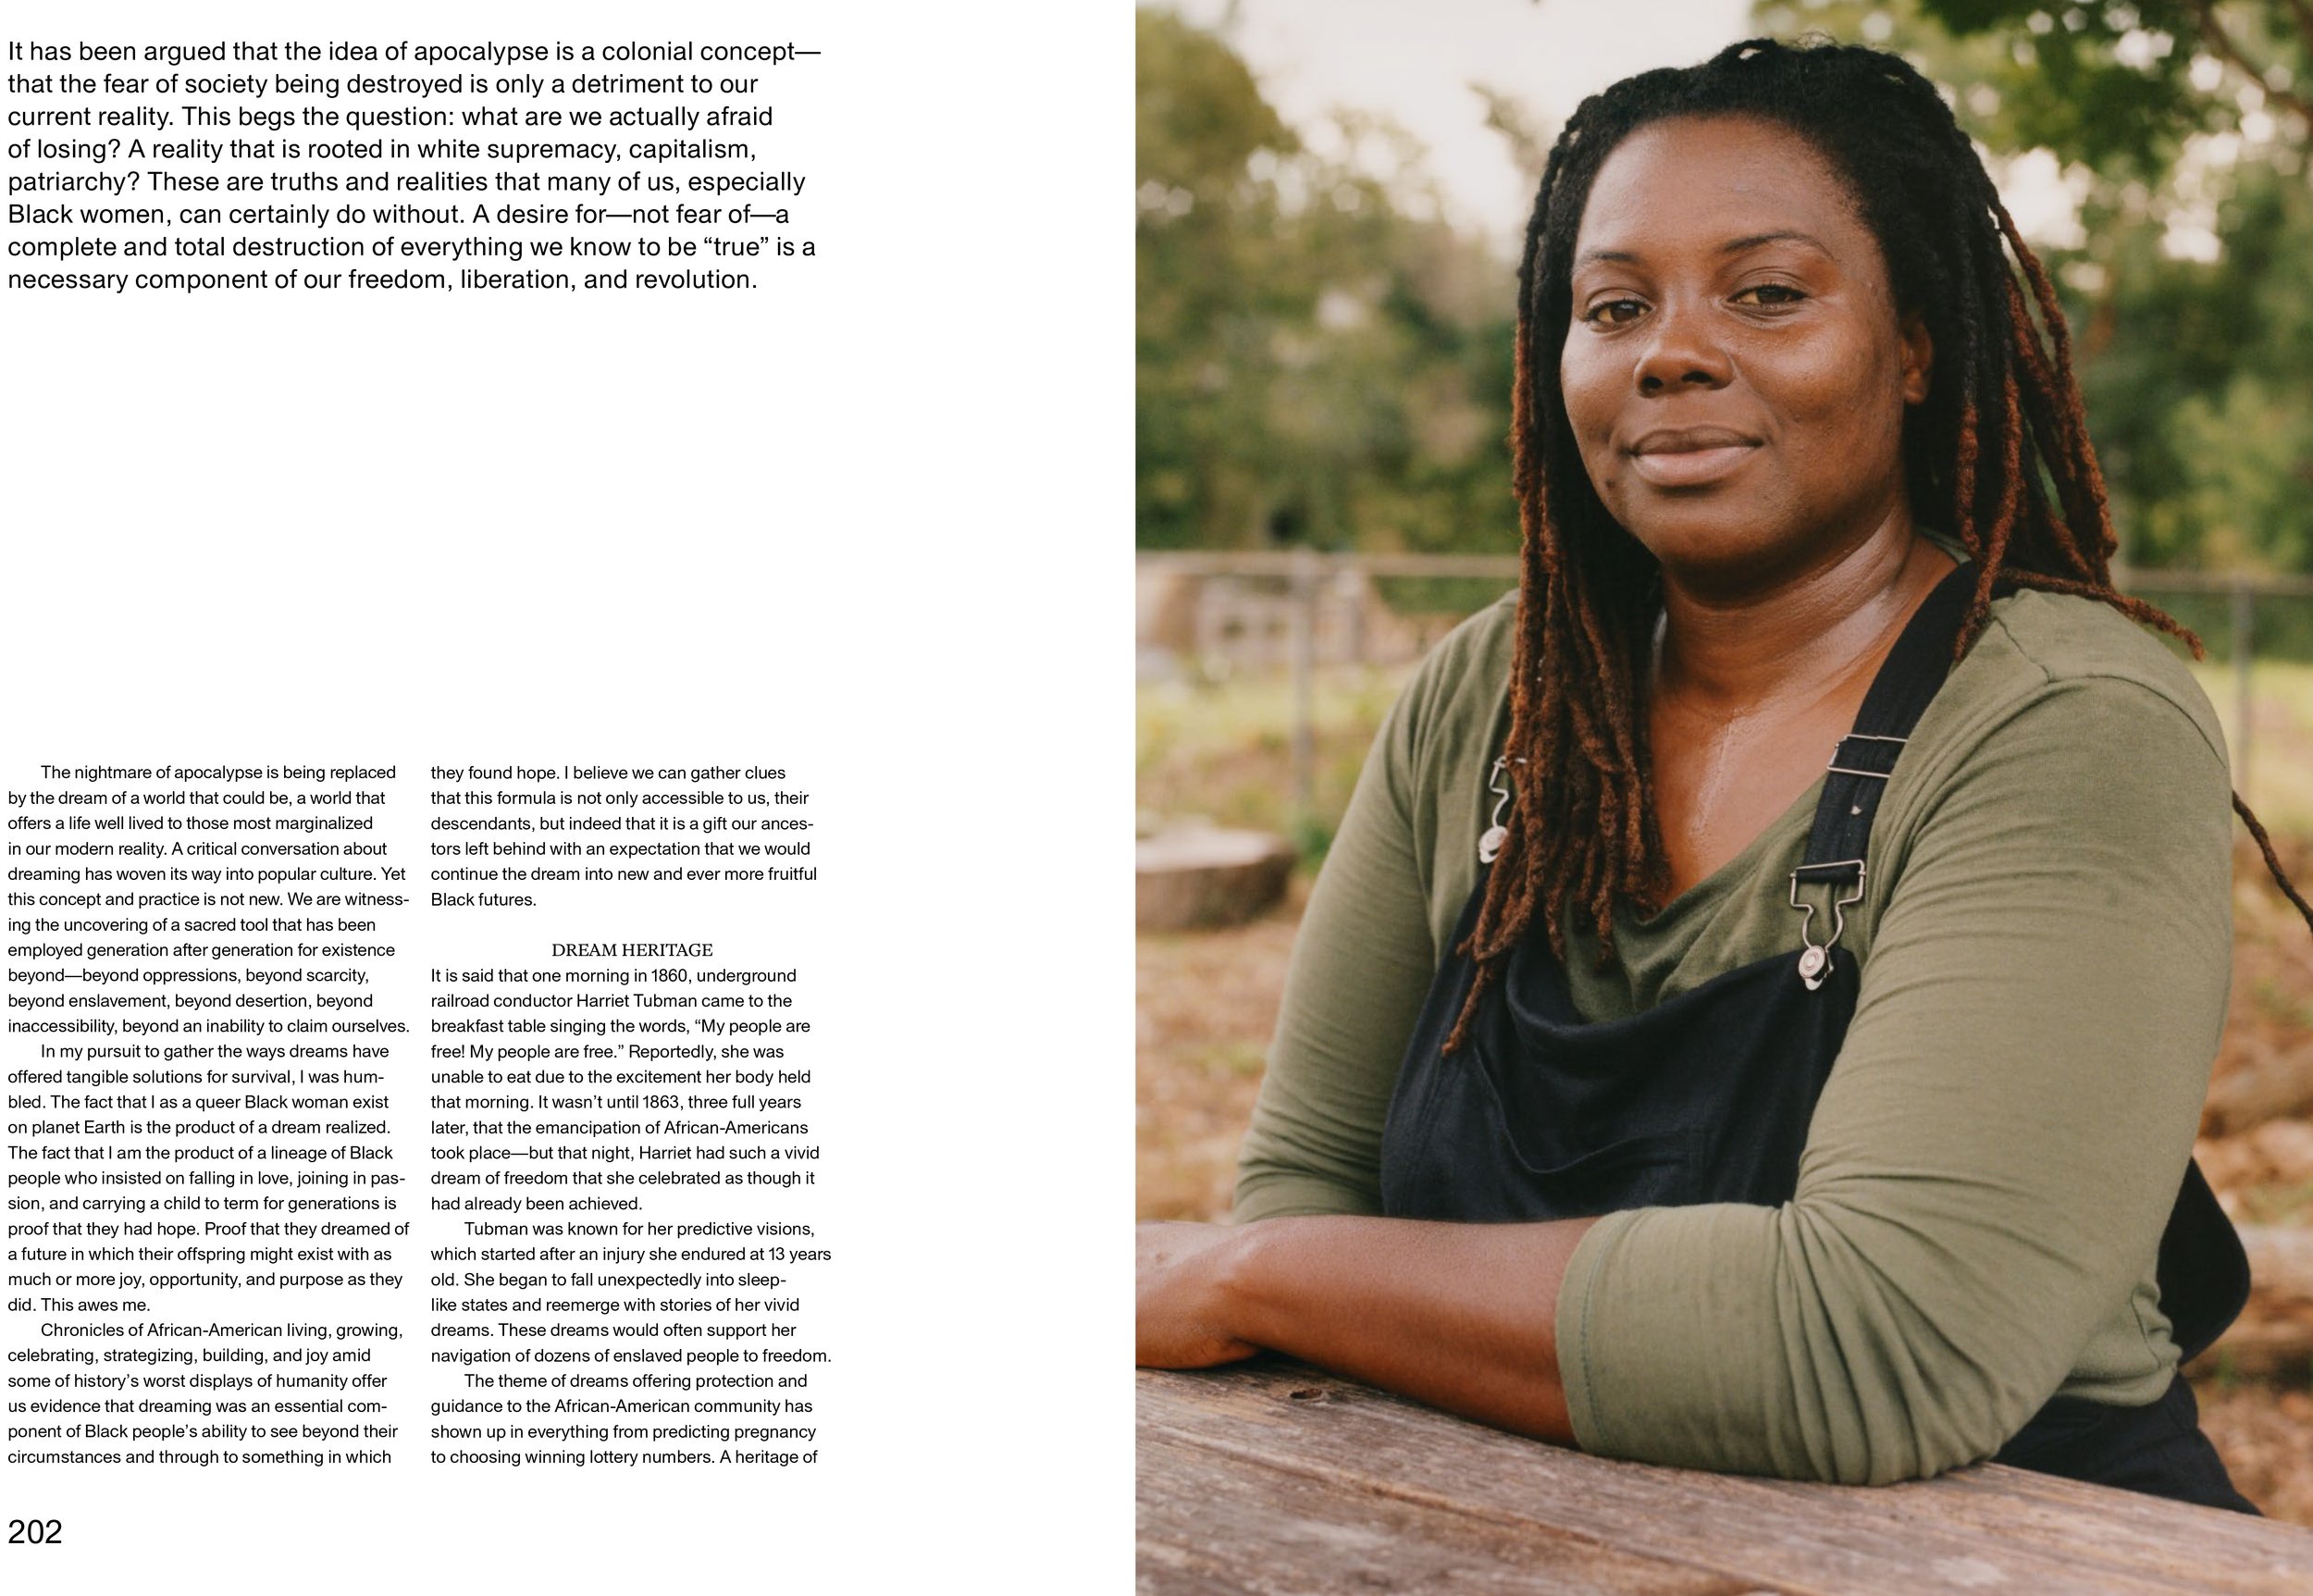  Farmer Nancy, owner of Dobbin-Kauv farm in Austin, TX. Dobbin-Kauv currently is the only Black owned farm within the city limits. 